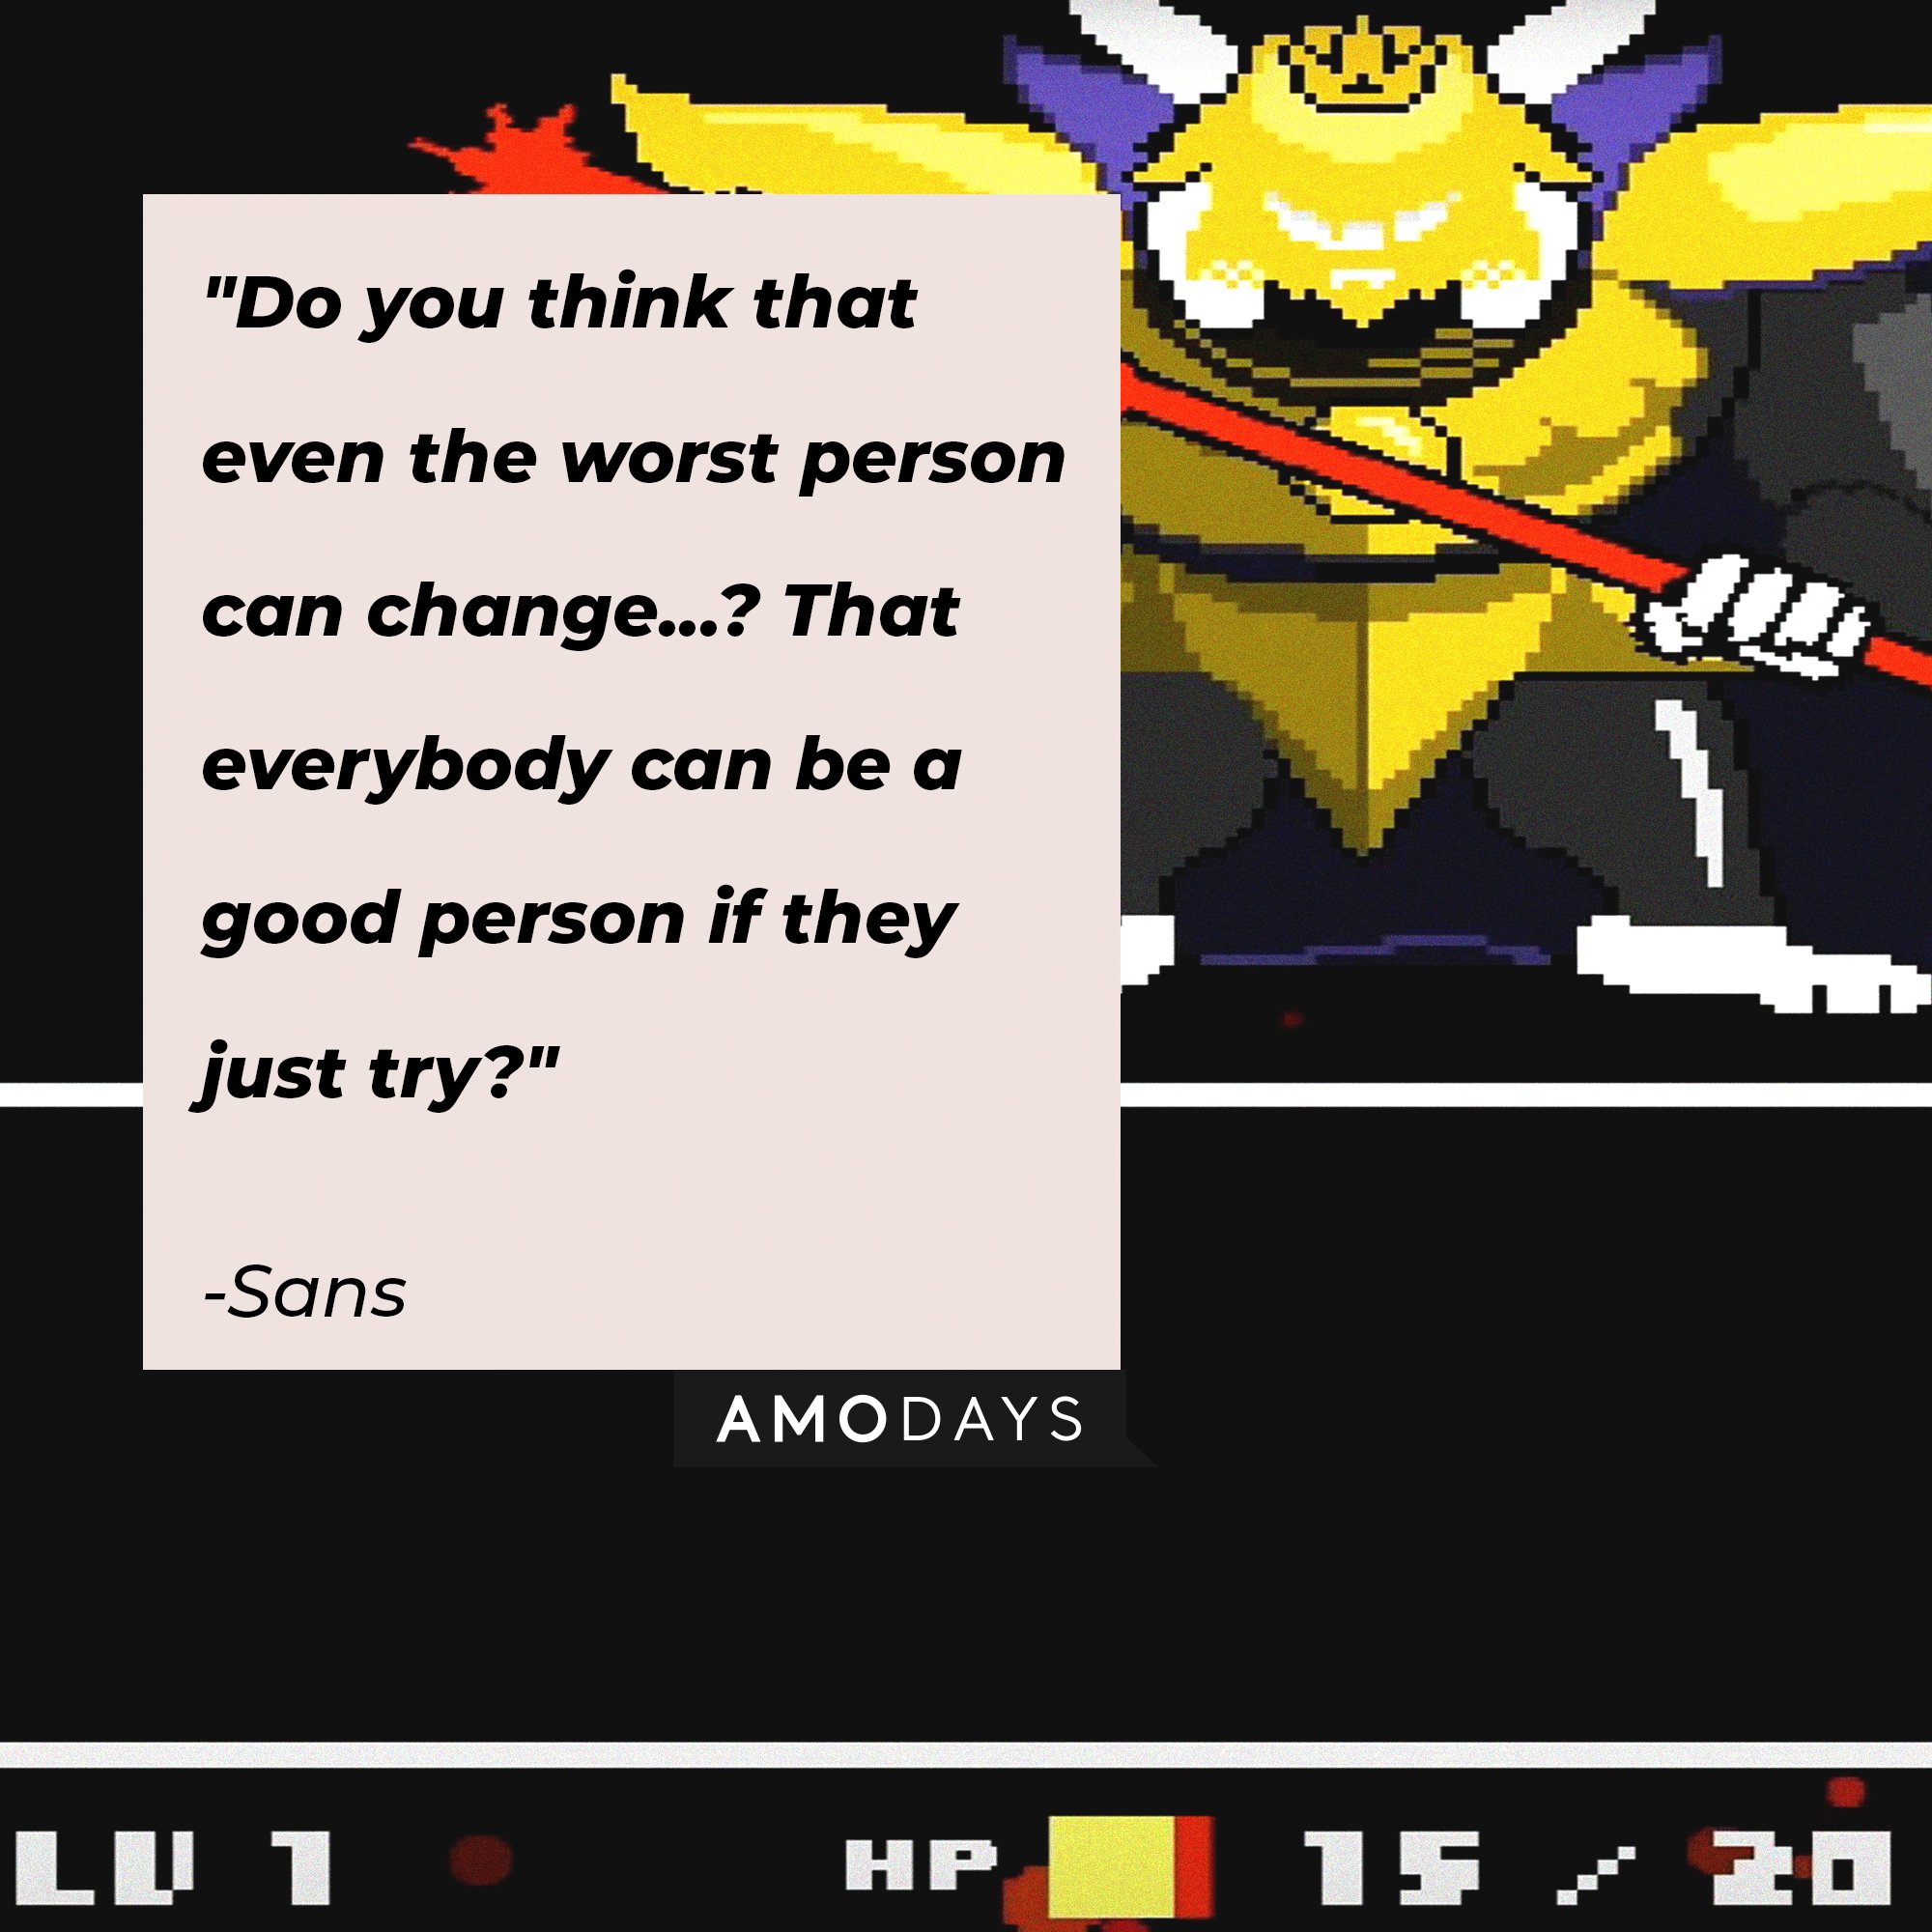 Sans’ quote: "Do you think that even the worst person can change...? That everybody can be a good person if they just try?" | Image: AmoDays